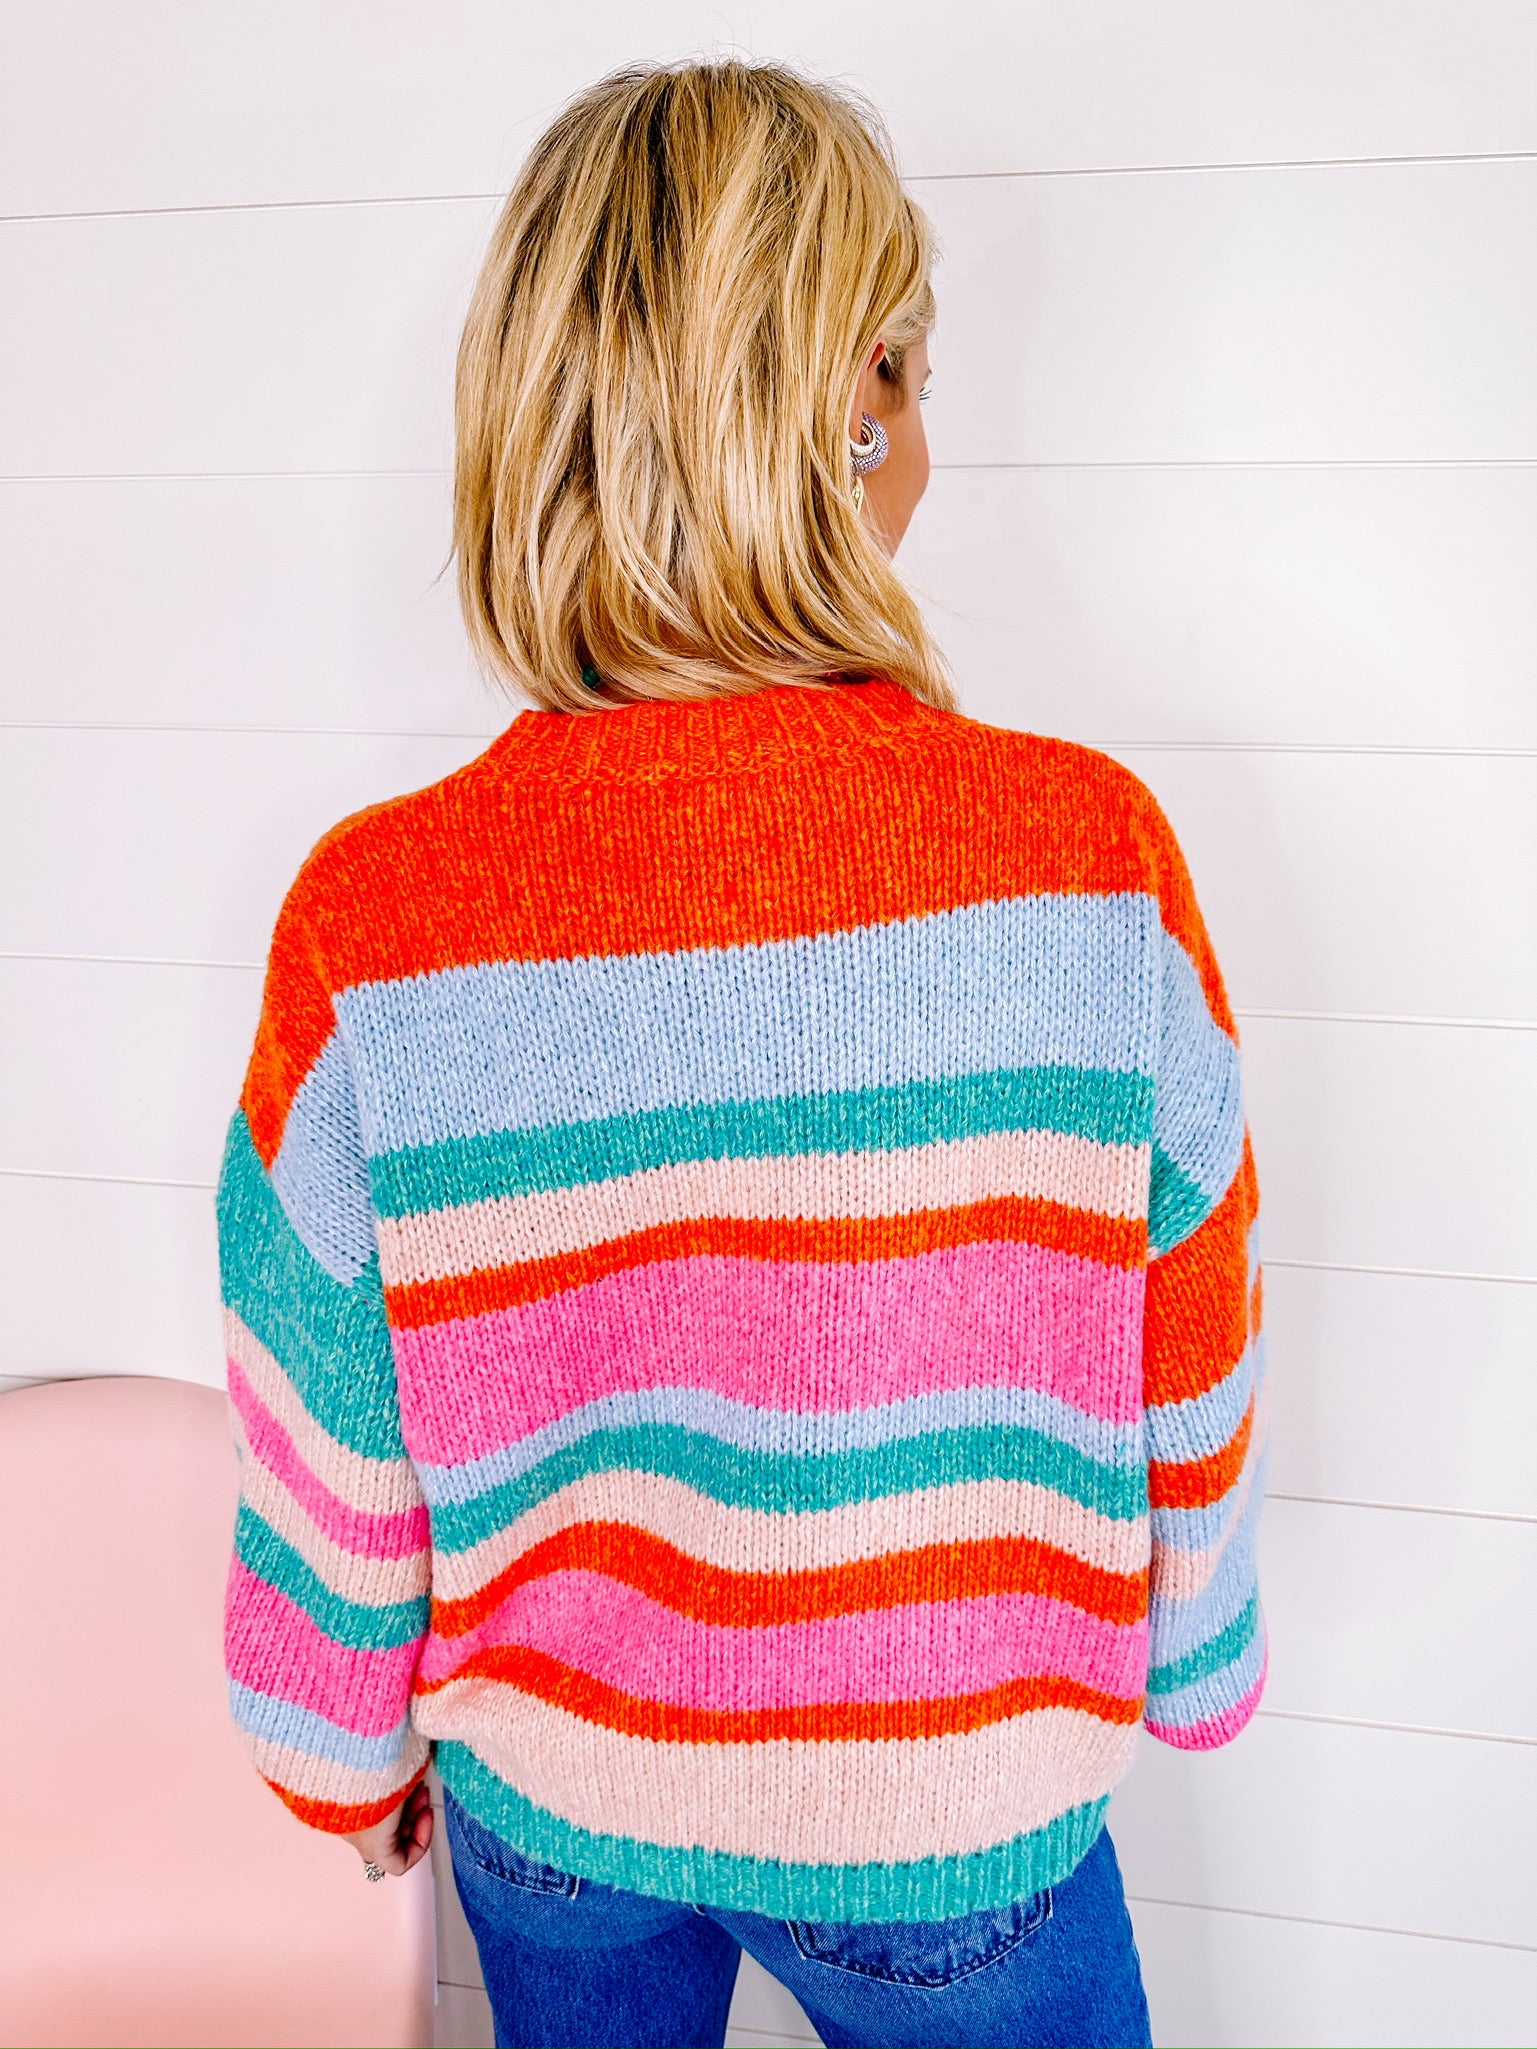 SHE'S AN AUTUMN COLORFUL STRIPE SWEATER